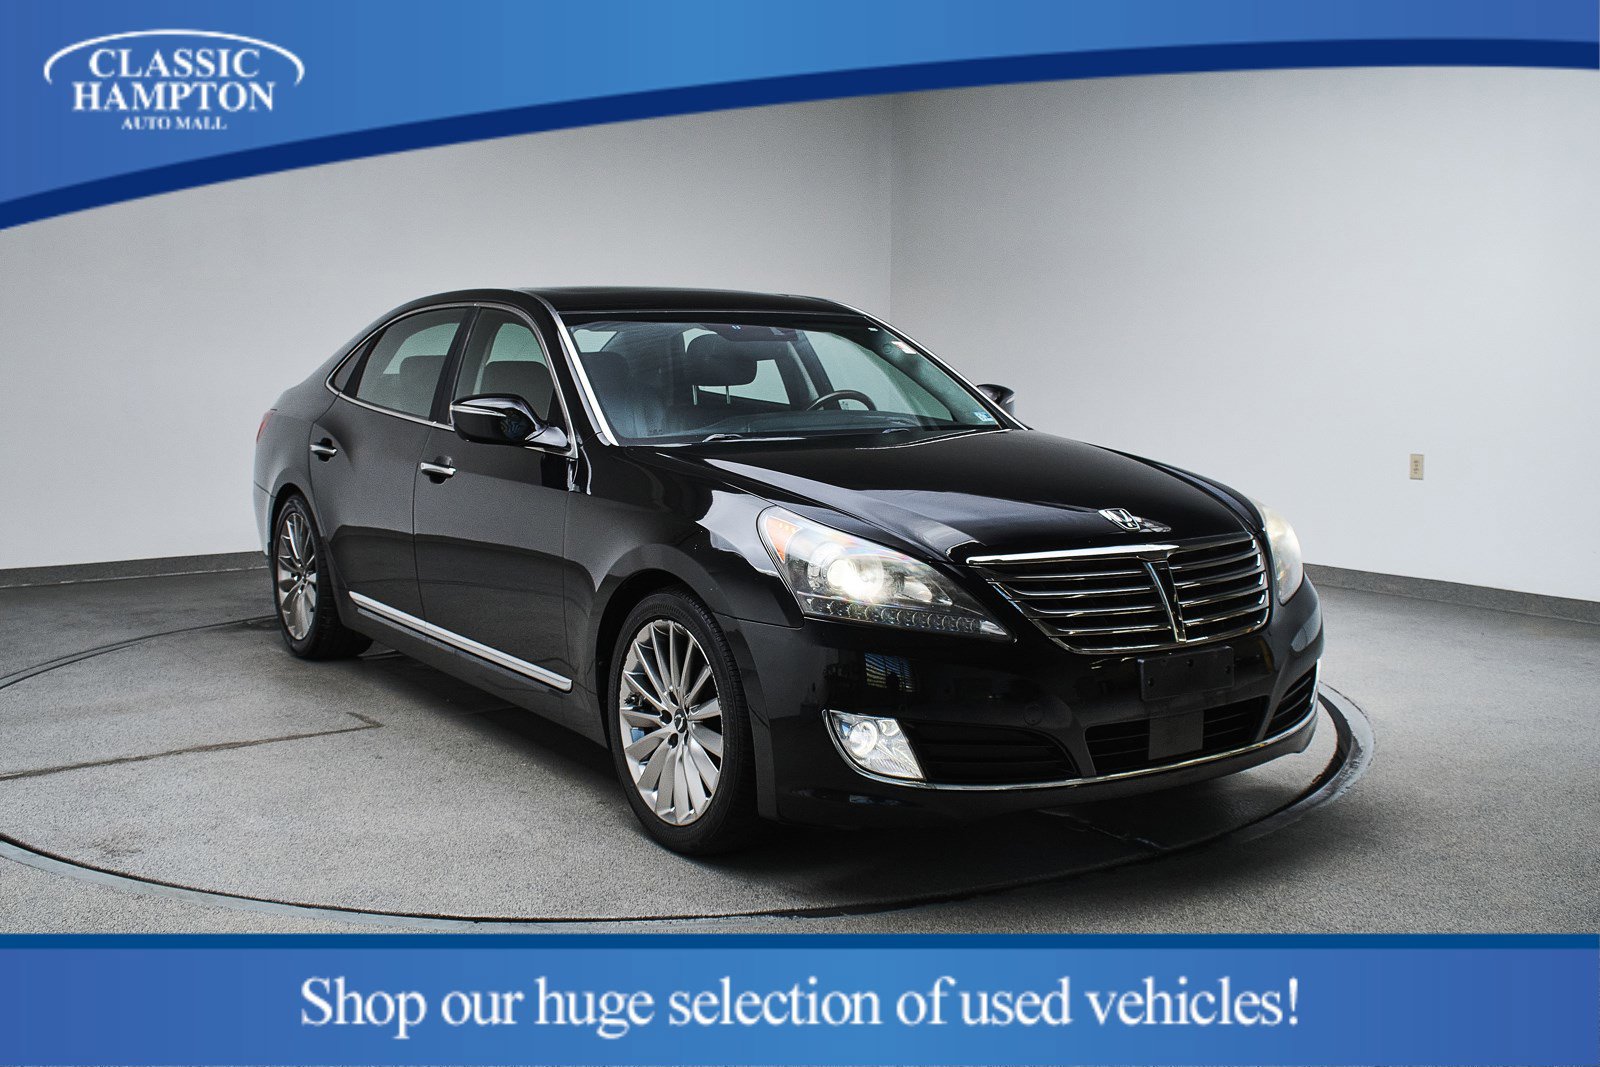 Pre-Owned 2014 Hyundai Equus Signature 4dr Car in Smithfield #GE53127B |  Classic Ford of Smithfield